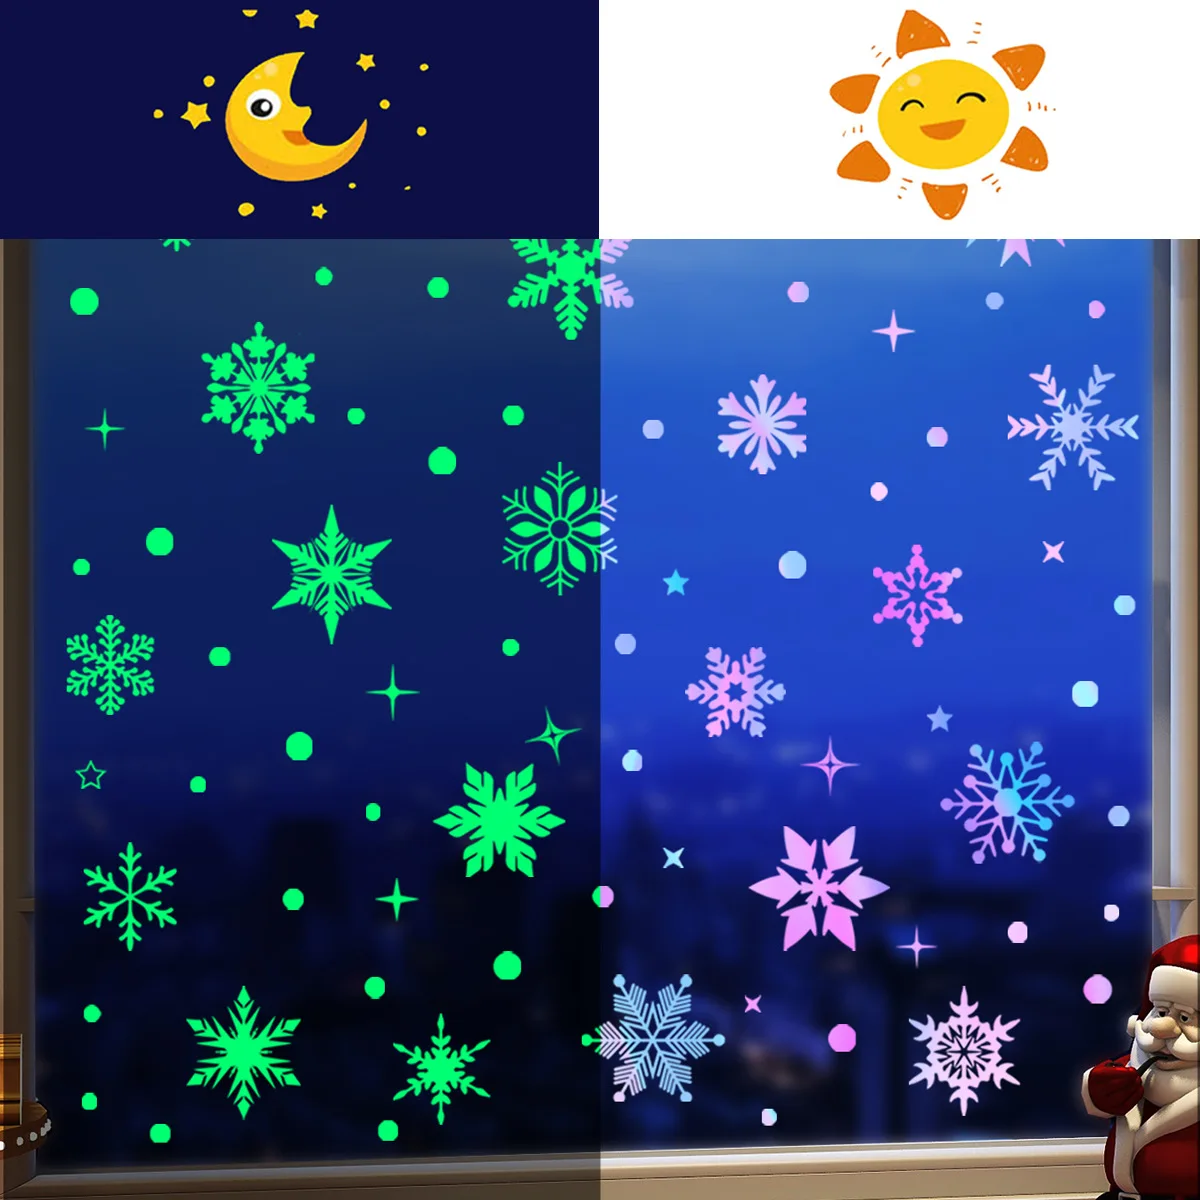 3pcs Colorful Luminous Snowflake Wall Stickers Glass Window Decorative Wall Stickers Christmas Wall Stickers Wallpapers Jdx8015 3pcs lot christmas jute bags 10x14 13x18 15x20cm candy bracelet jewelry packaging bags snowflake drawstring gift bag